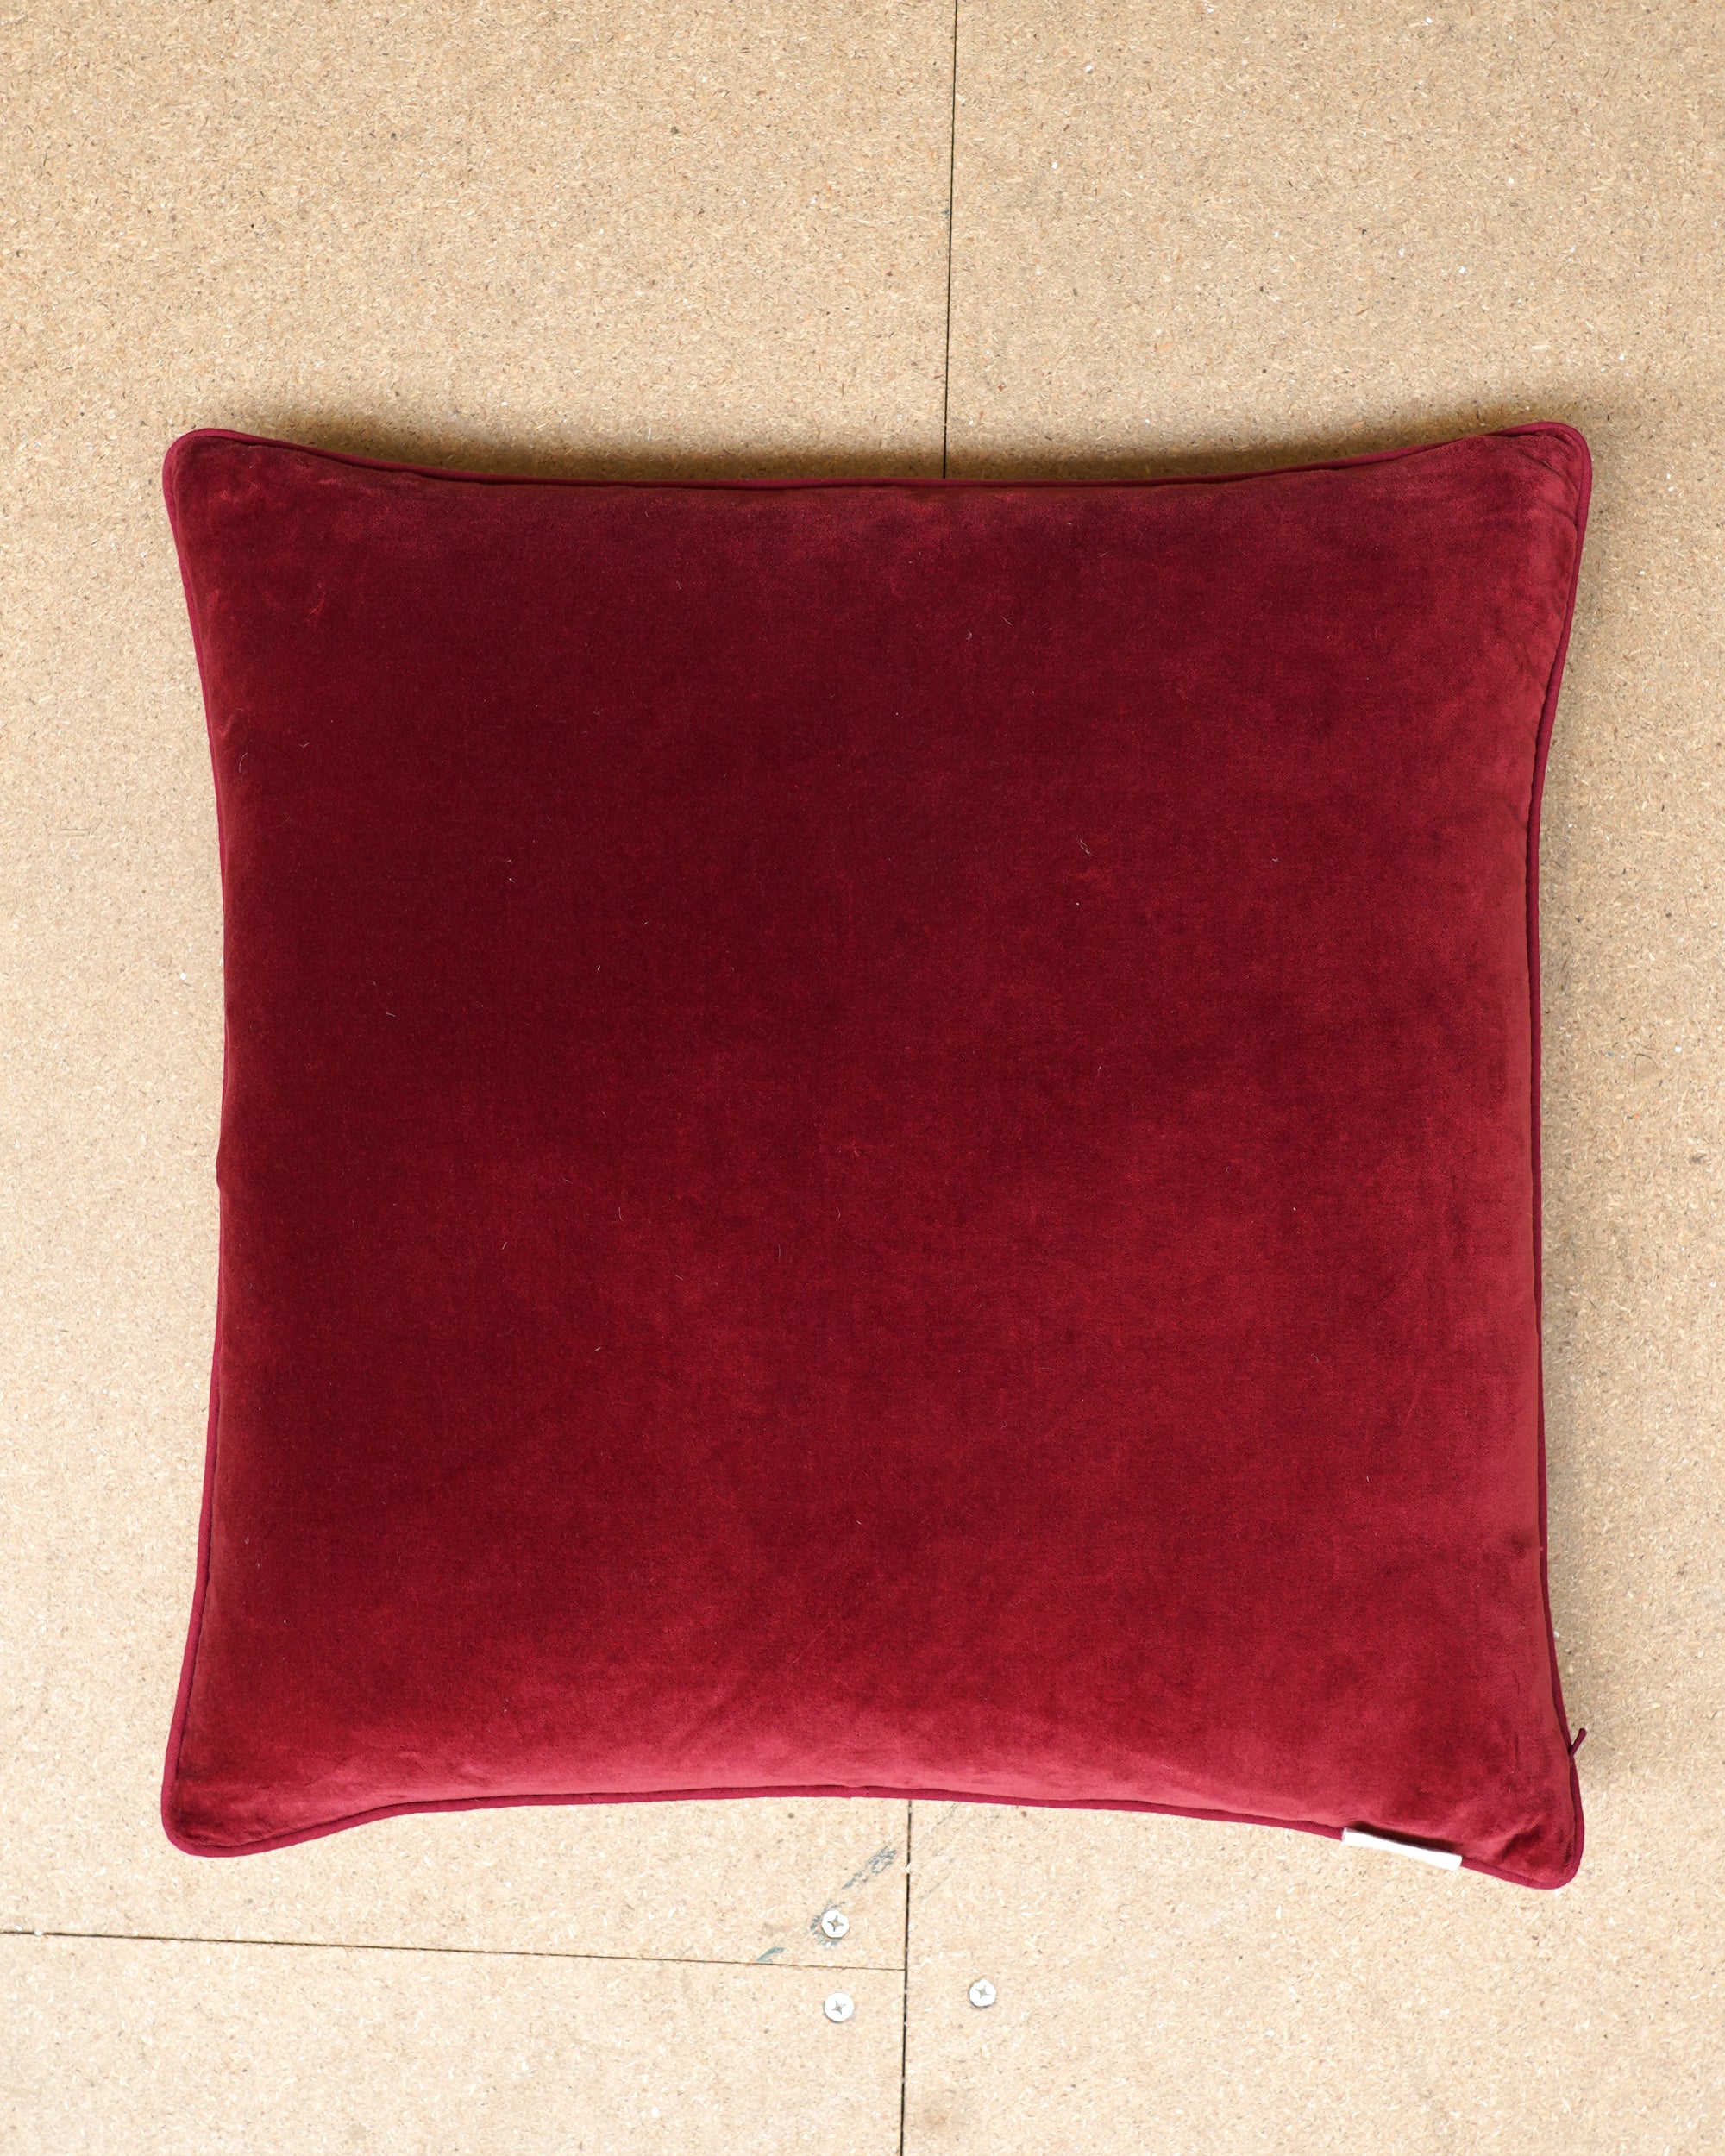 The Embroidered Envelope Cushion - The Red